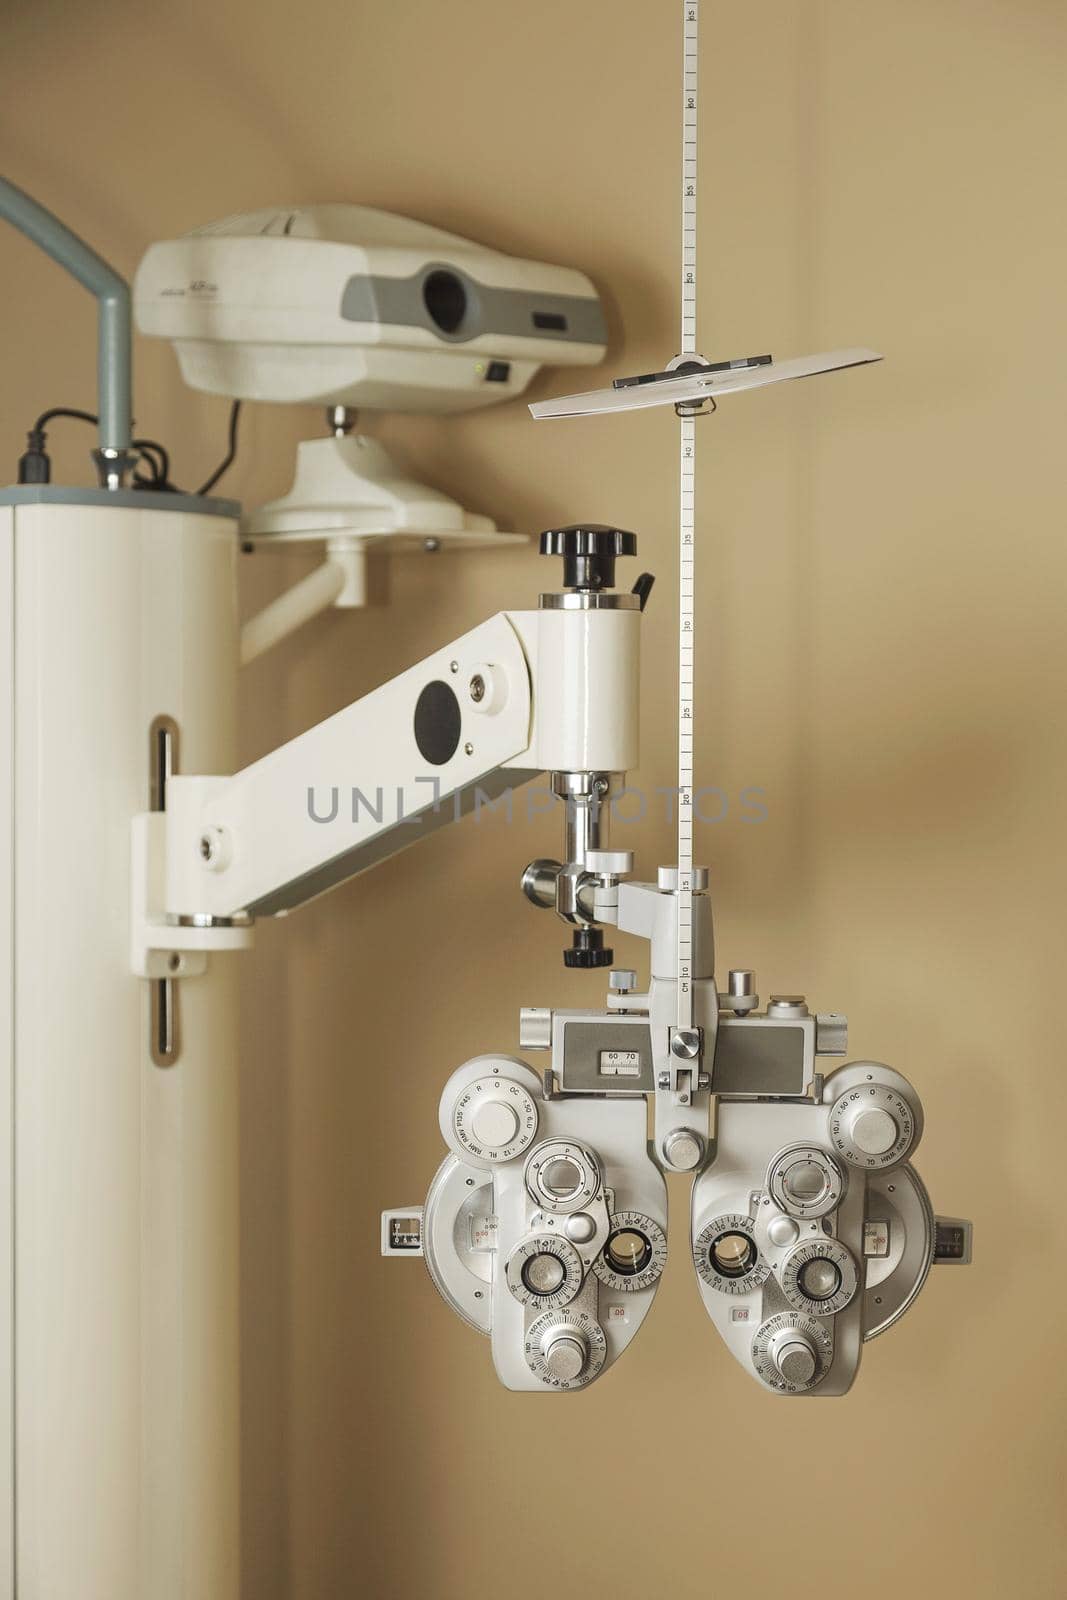 Phoropter optical device for measuring the vision of human eye